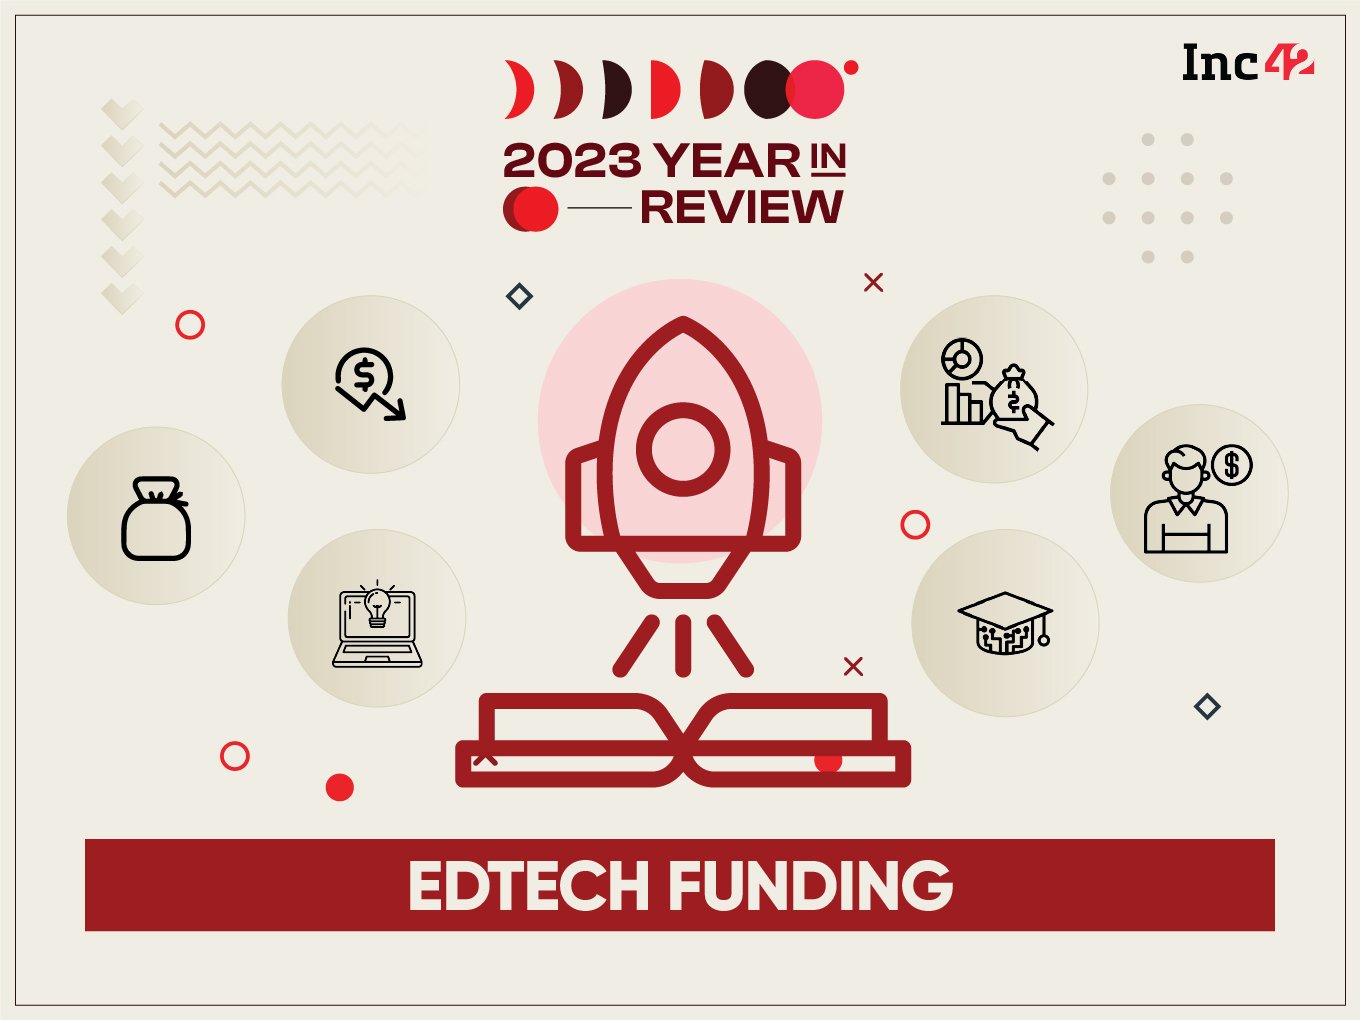 Late Stage Startups Critical As Edtech Funding Fell 88% In 2023